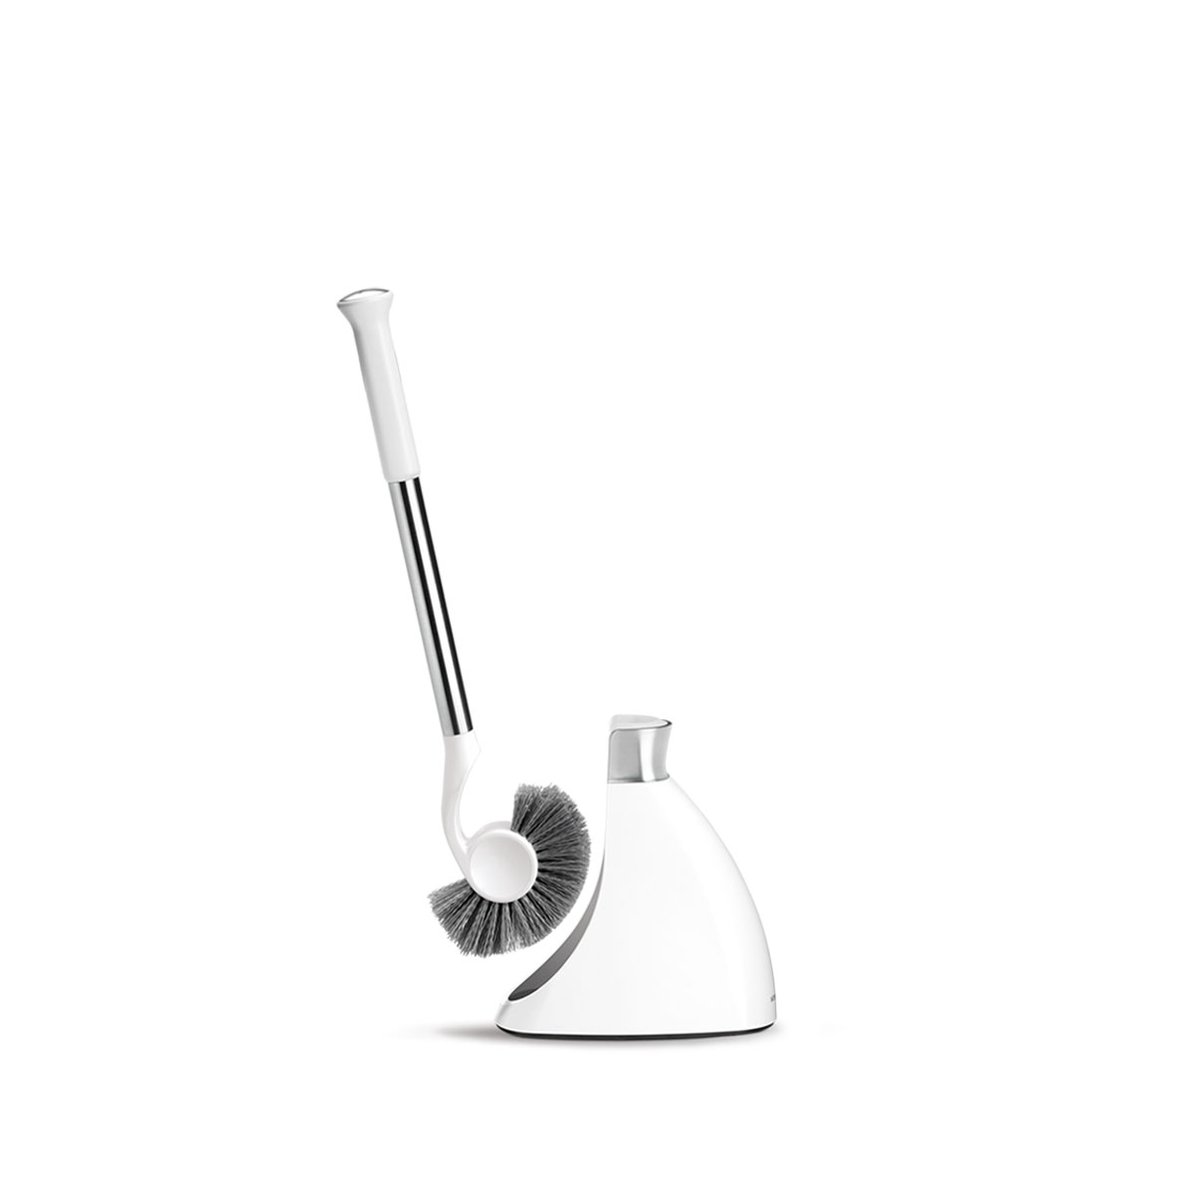 SIMPLEHUMAN TOILET BRUSH WITH CADDY, STAINLESS STEEL TOILET BRUSH